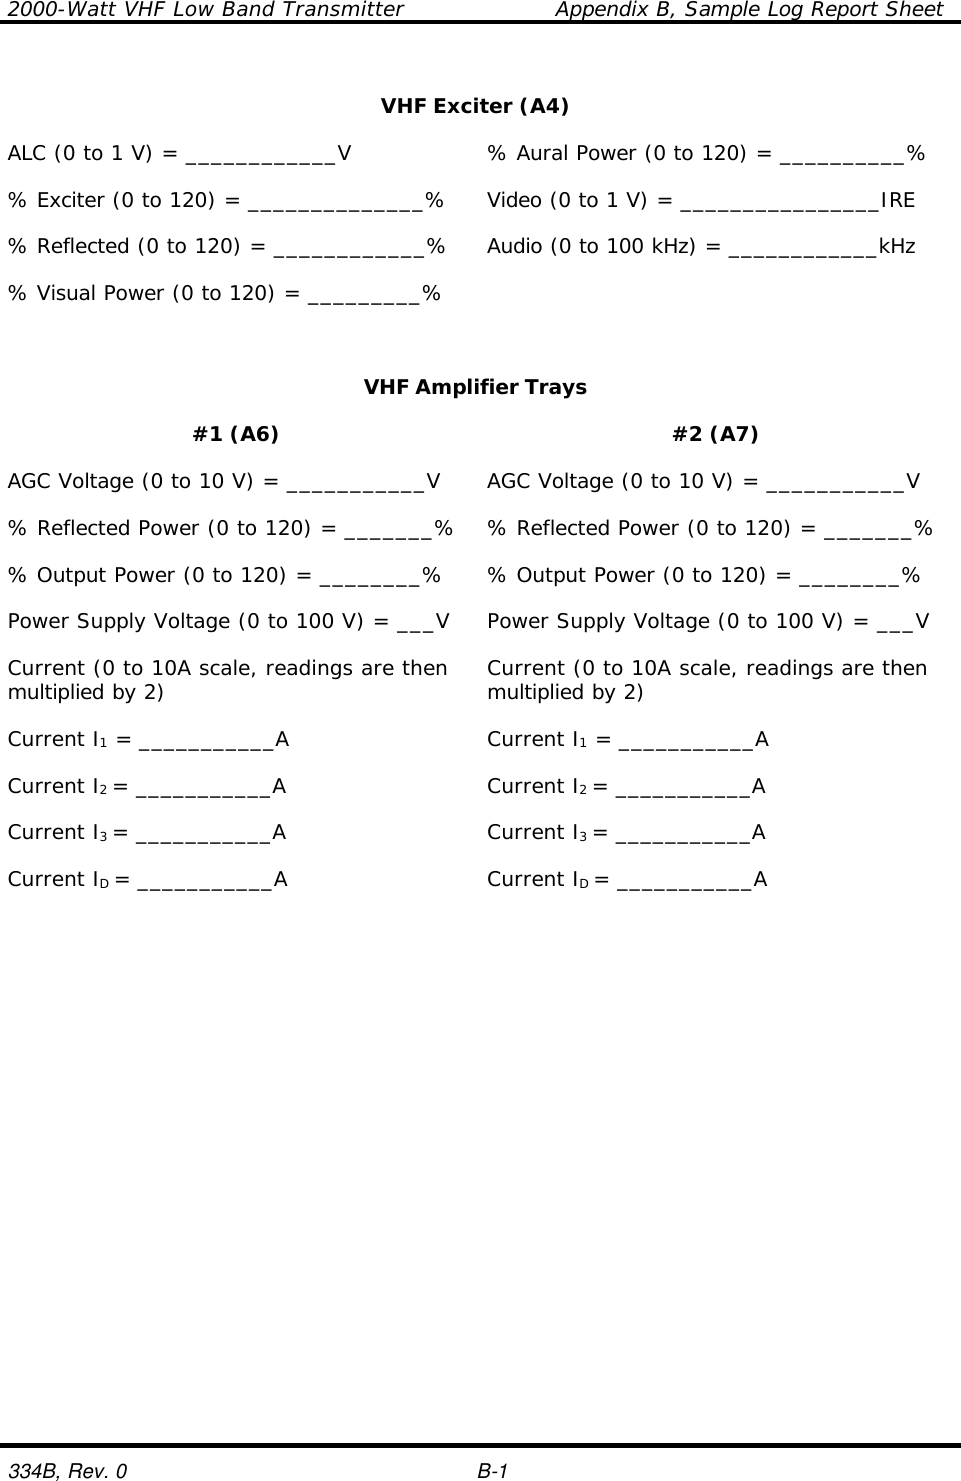 2000-Watt VHF Low Band Transmitter    Appendix B, Sample Log Report Sheet  334B, Rev. 0    B-1  VHF Exciter (A4)    ALC (0 to 1 V) = ____________V % Aural Power (0 to 120) = __________%    % Exciter (0 to 120) = ______________% Video (0 to 1 V) = ________________IRE    % Reflected (0 to 120) = ____________% Audio (0 to 100 kHz) = ____________kHz    % Visual Power (0 to 120) = _________%      VHF Amplifier Trays    #1 (A6) #2 (A7)    AGC Voltage (0 to 10 V) = ___________V AGC Voltage (0 to 10 V) = ___________V    % Reflected Power (0 to 120) = _______% % Reflected Power (0 to 120) = _______%    % Output Power (0 to 120) = ________% % Output Power (0 to 120) = ________%    Power Supply Voltage (0 to 100 V) = ___V Power Supply Voltage (0 to 100 V) = ___V    Current (0 to 10A scale, readings are then multiplied by 2) Current (0 to 10A scale, readings are then multiplied by 2)    Current I1 = ___________A Current I1 = ___________A    Current I2 = ___________A Current I2 = ___________A    Current I3 = ___________A Current I3 = ___________A    Current ID = ___________A Current ID = ___________A     